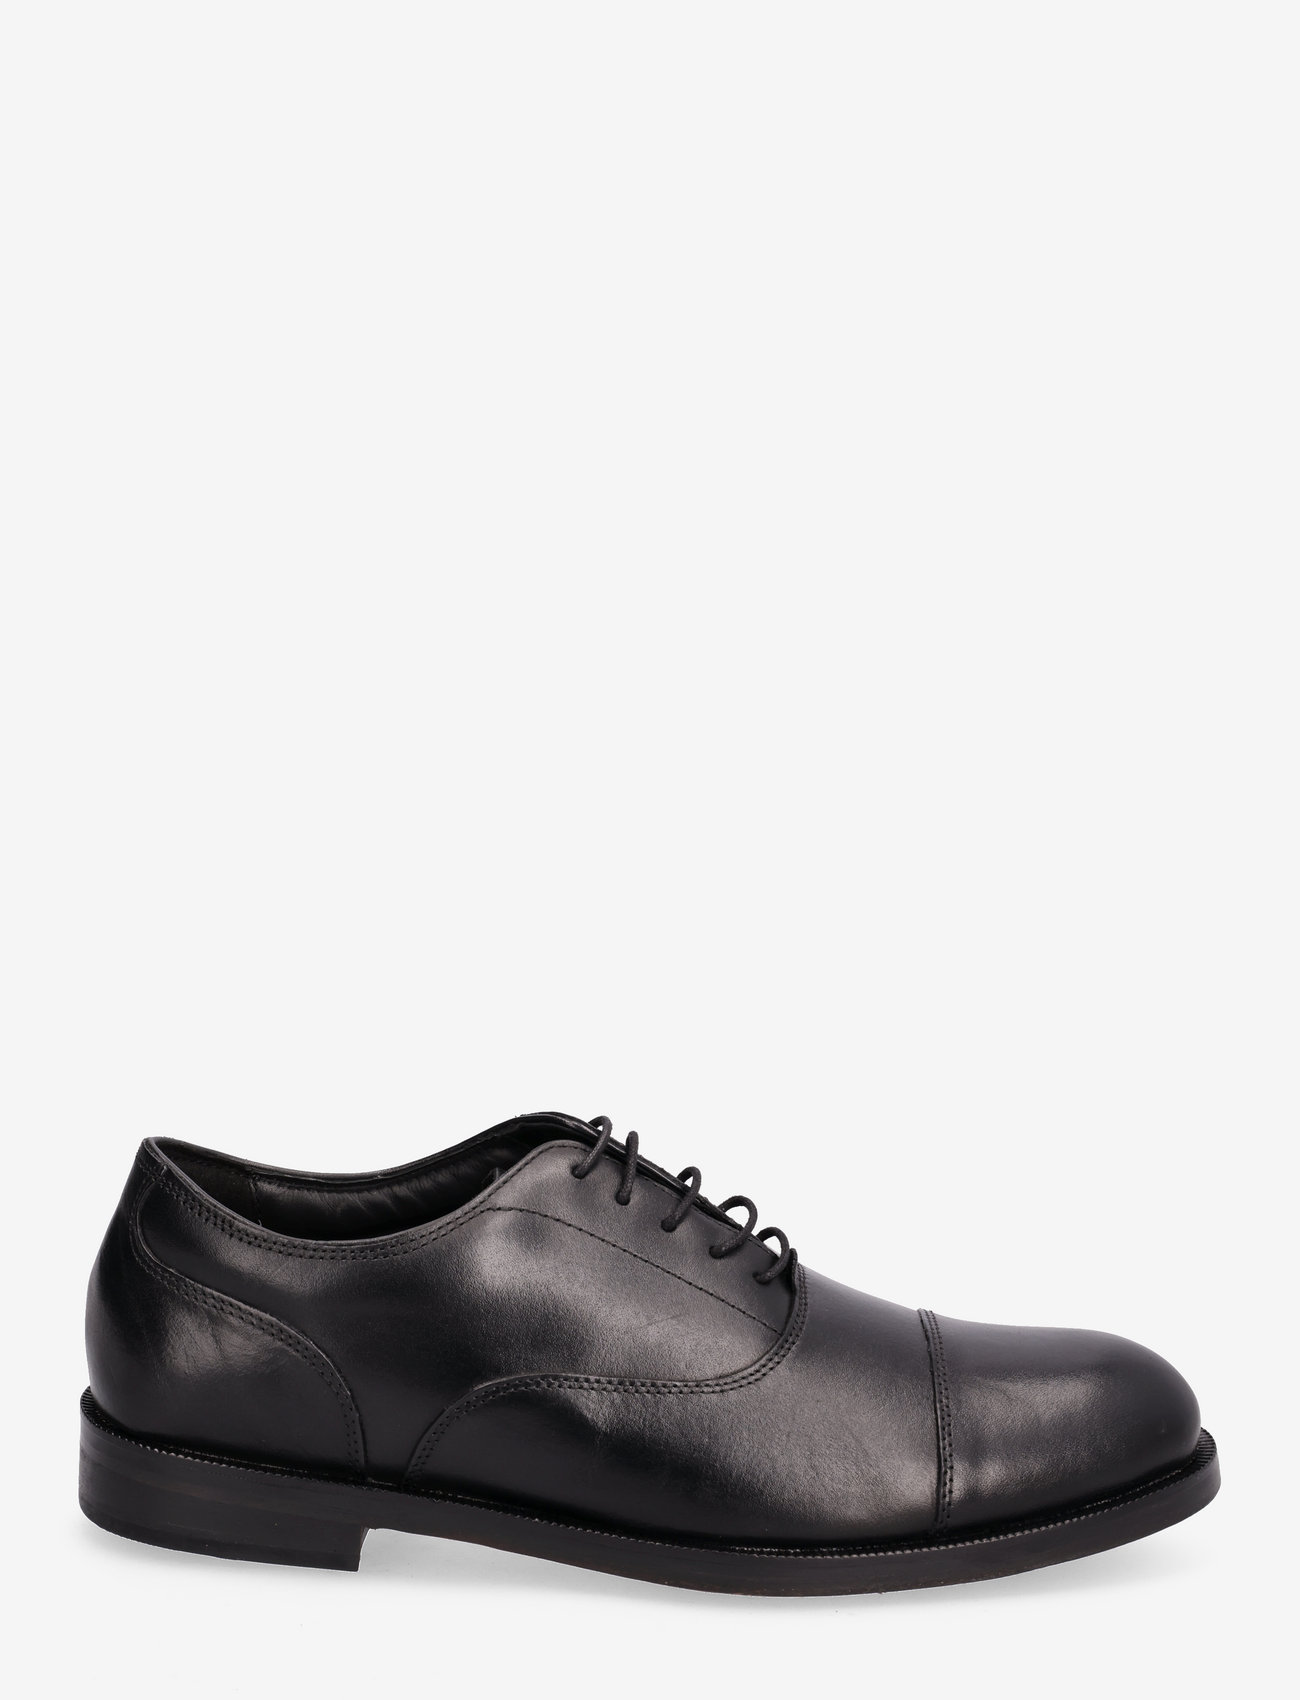 Clarks - Craftdean Cap - laced shoes - black leather - 1